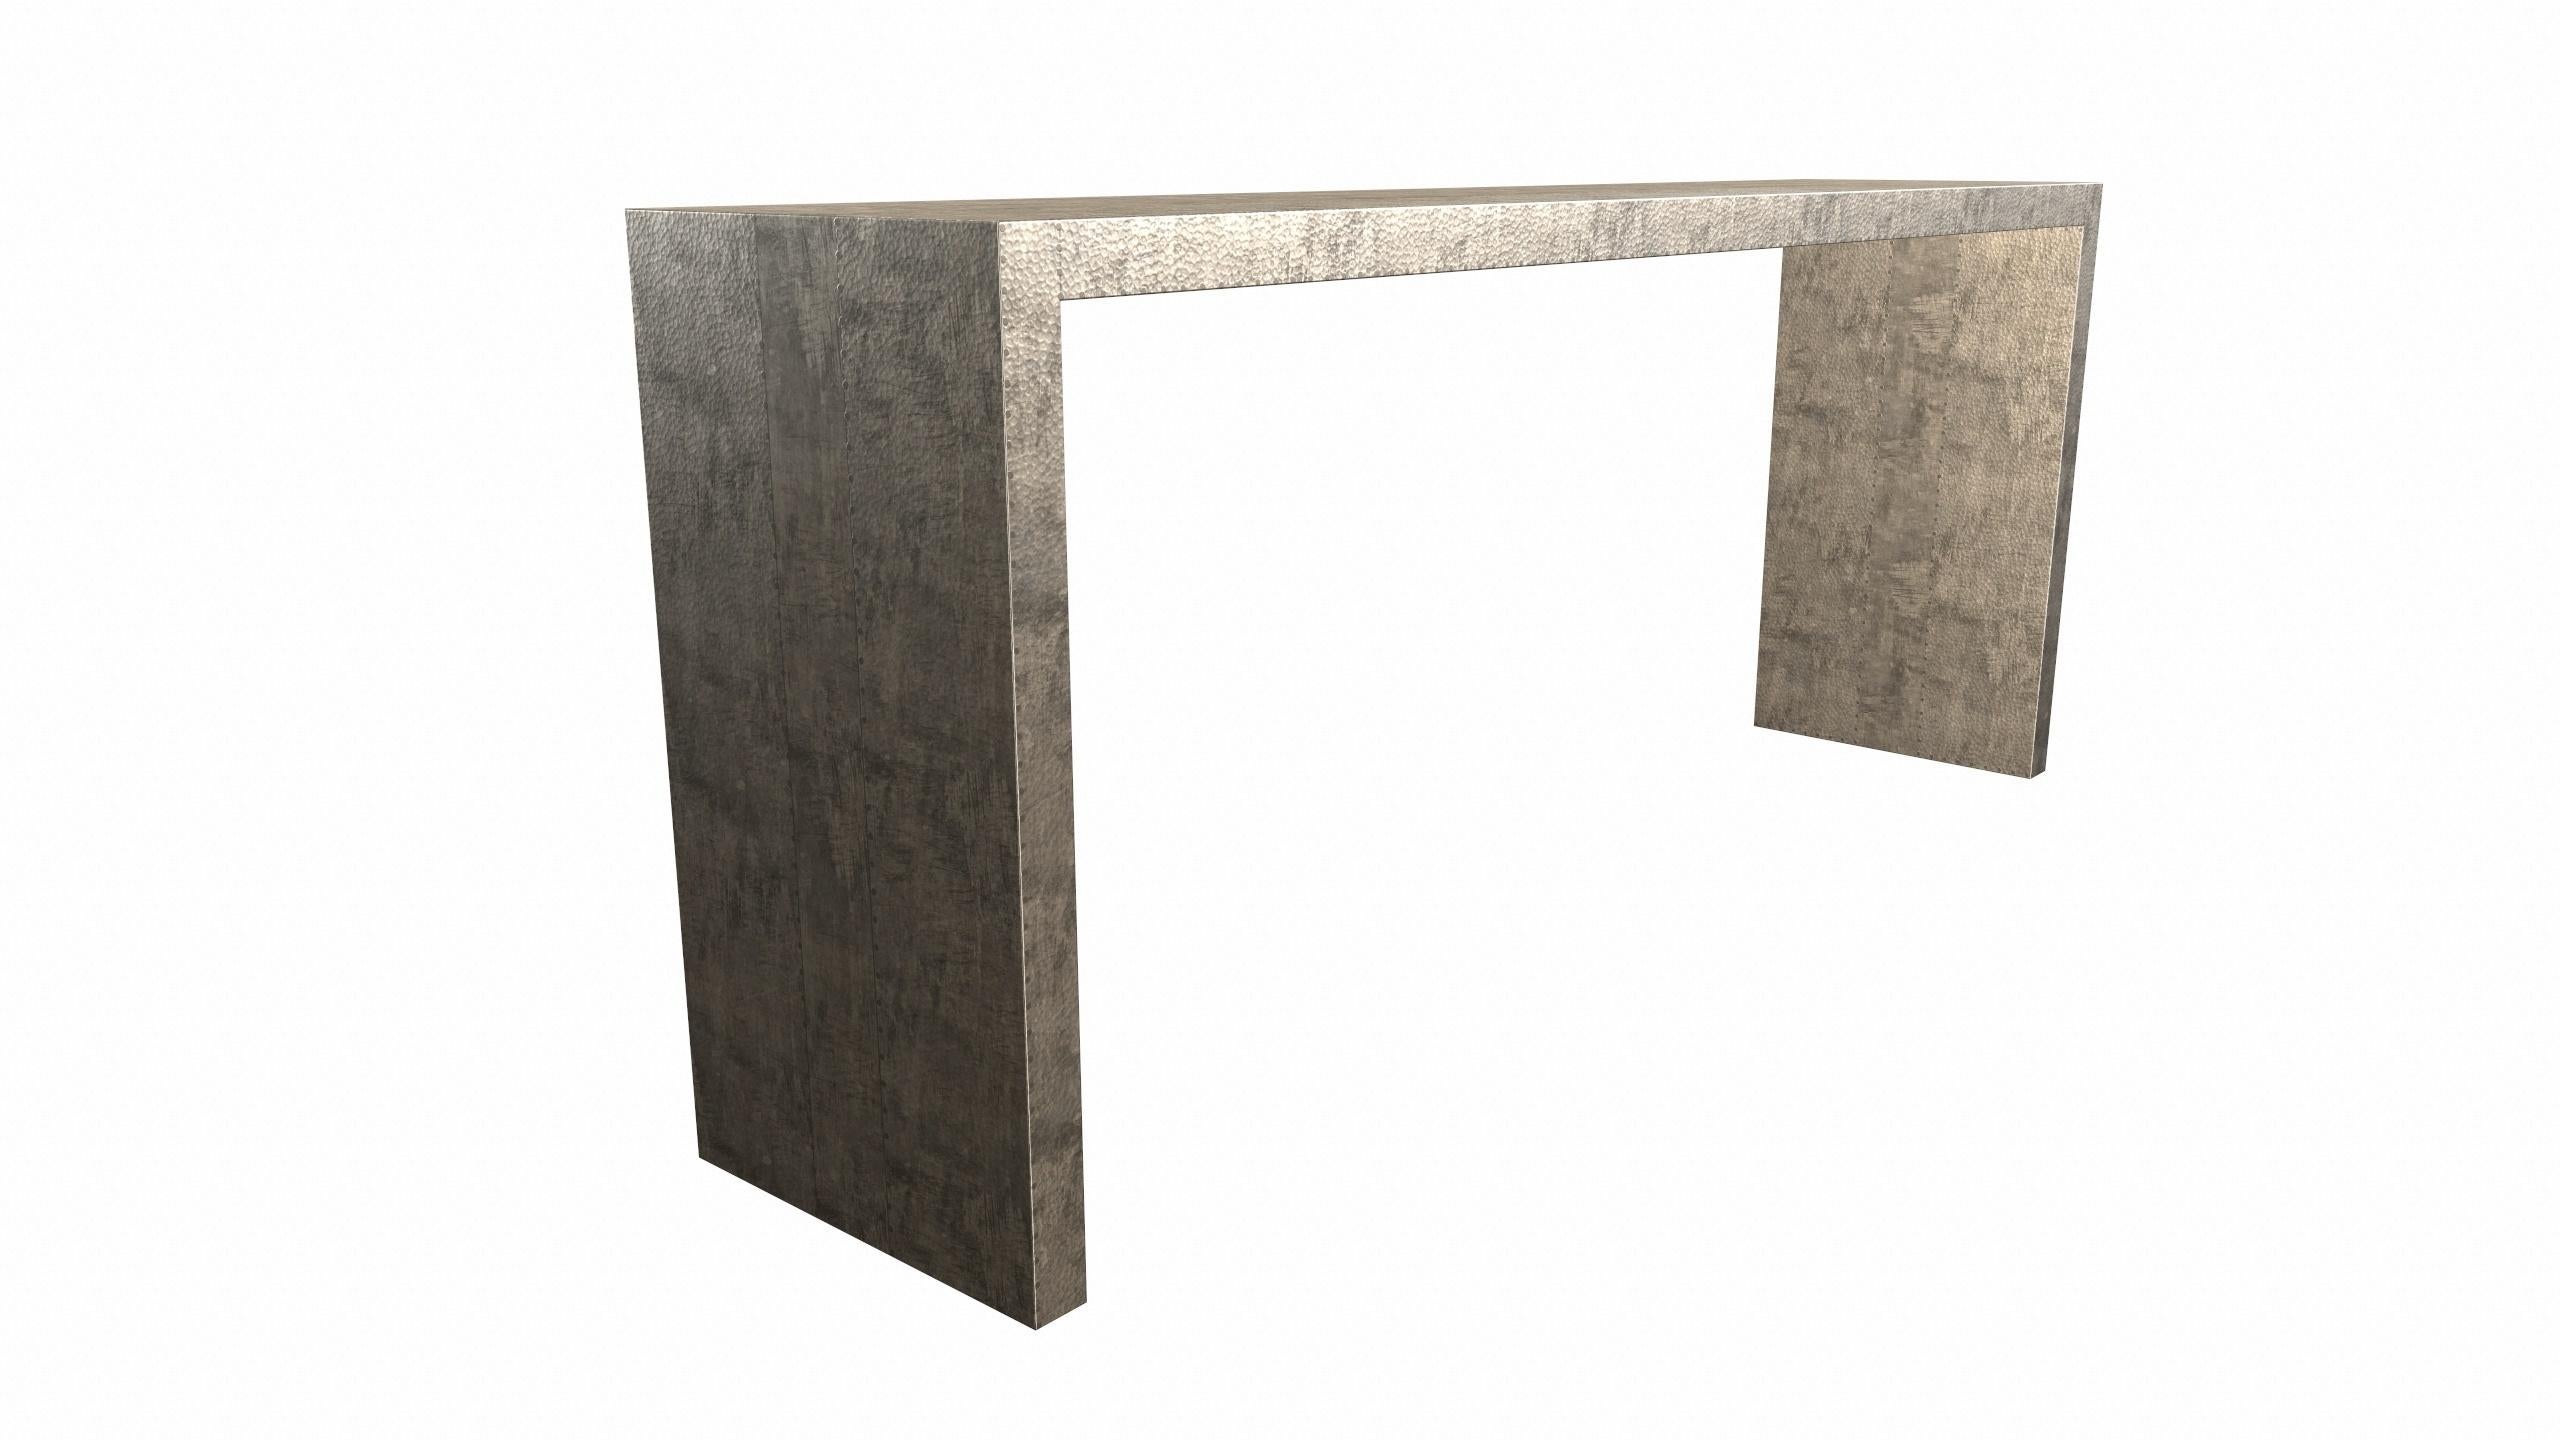 American Art Deco Rectangular Console Tables Mid. Hammered Antique Bronze by Alison Spear For Sale